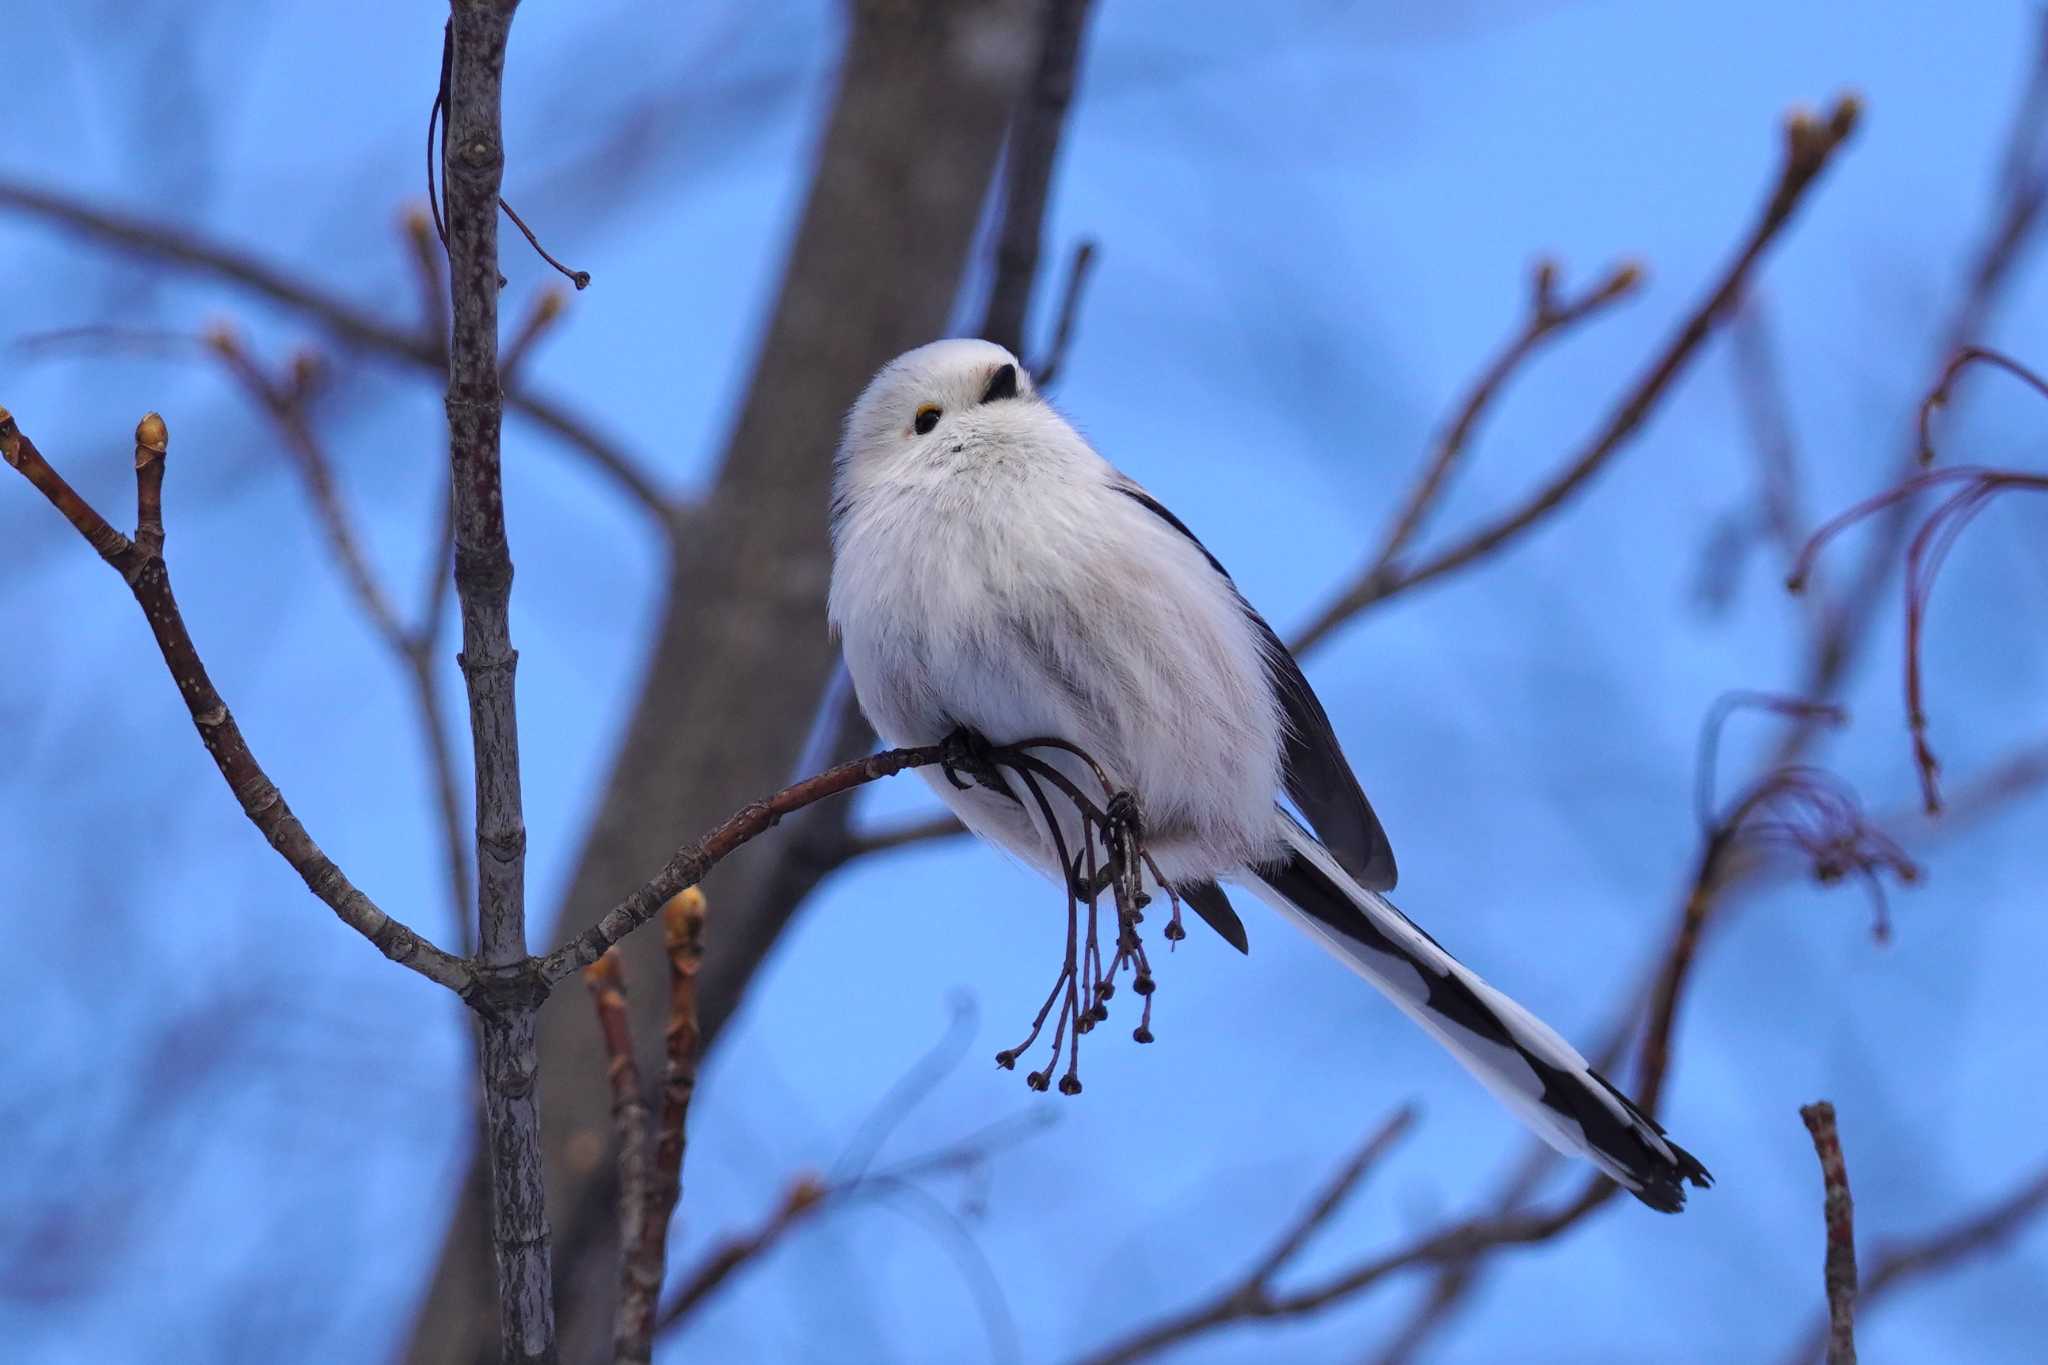 Photo of Long-tailed tit(japonicus) at Makomanai Park by くまちん